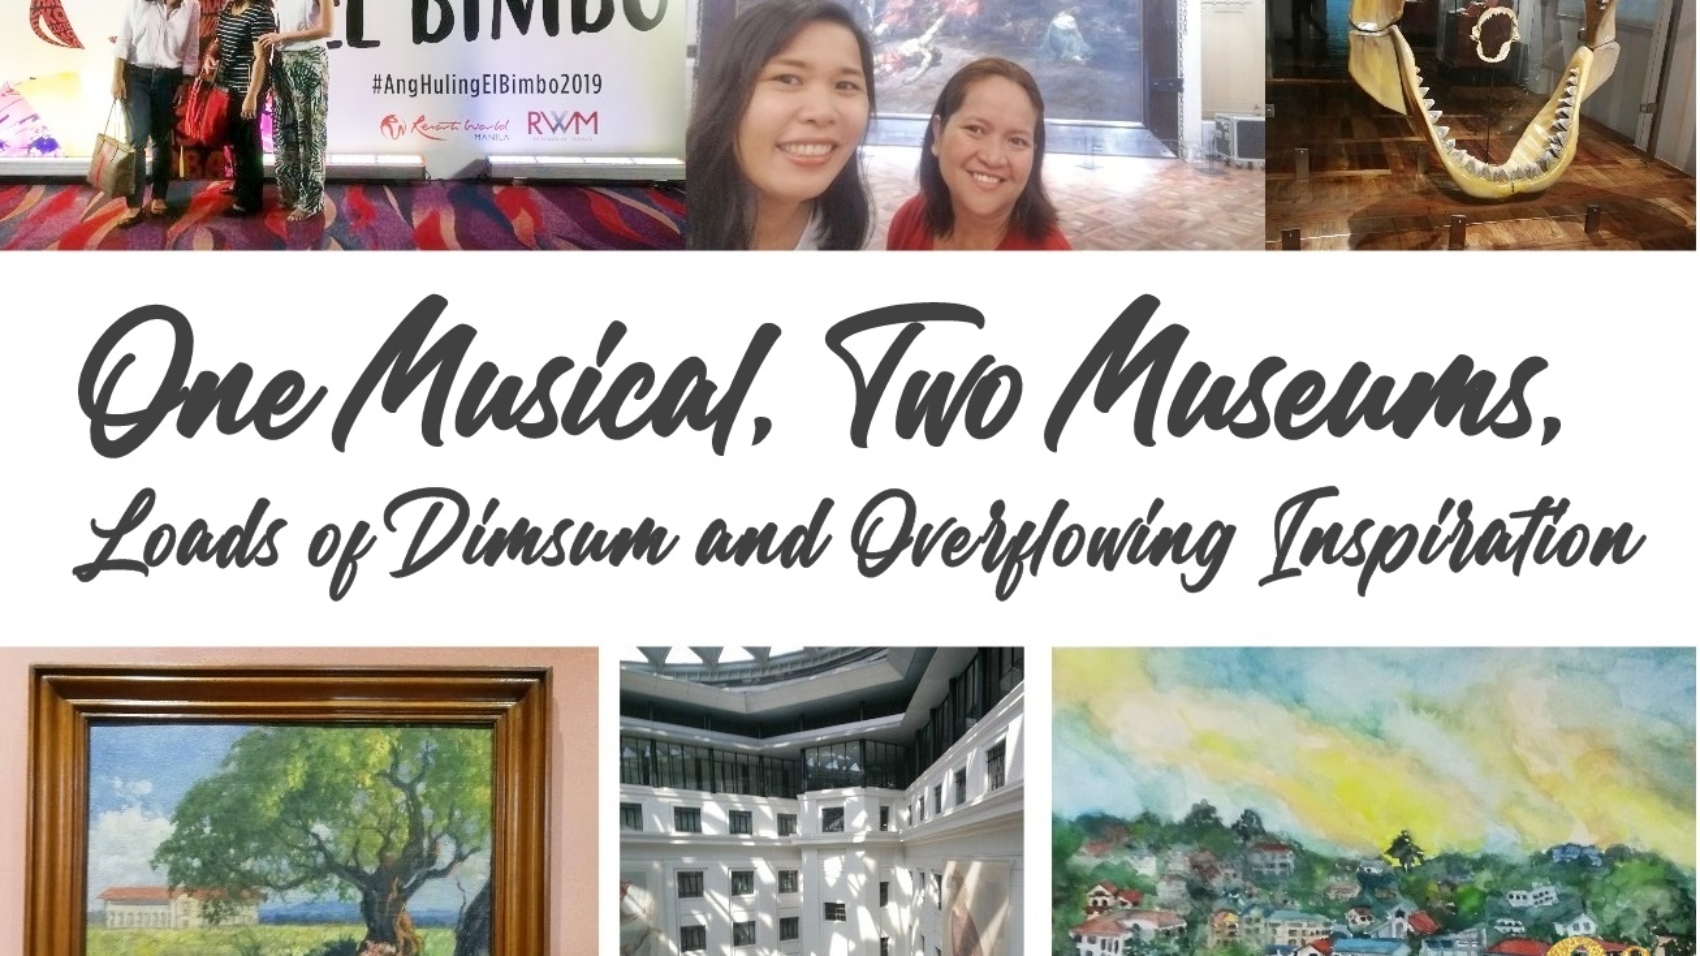 One Musical, Two Museums, Loads of Dimsum and Overflowing Inspiration 01 (1)